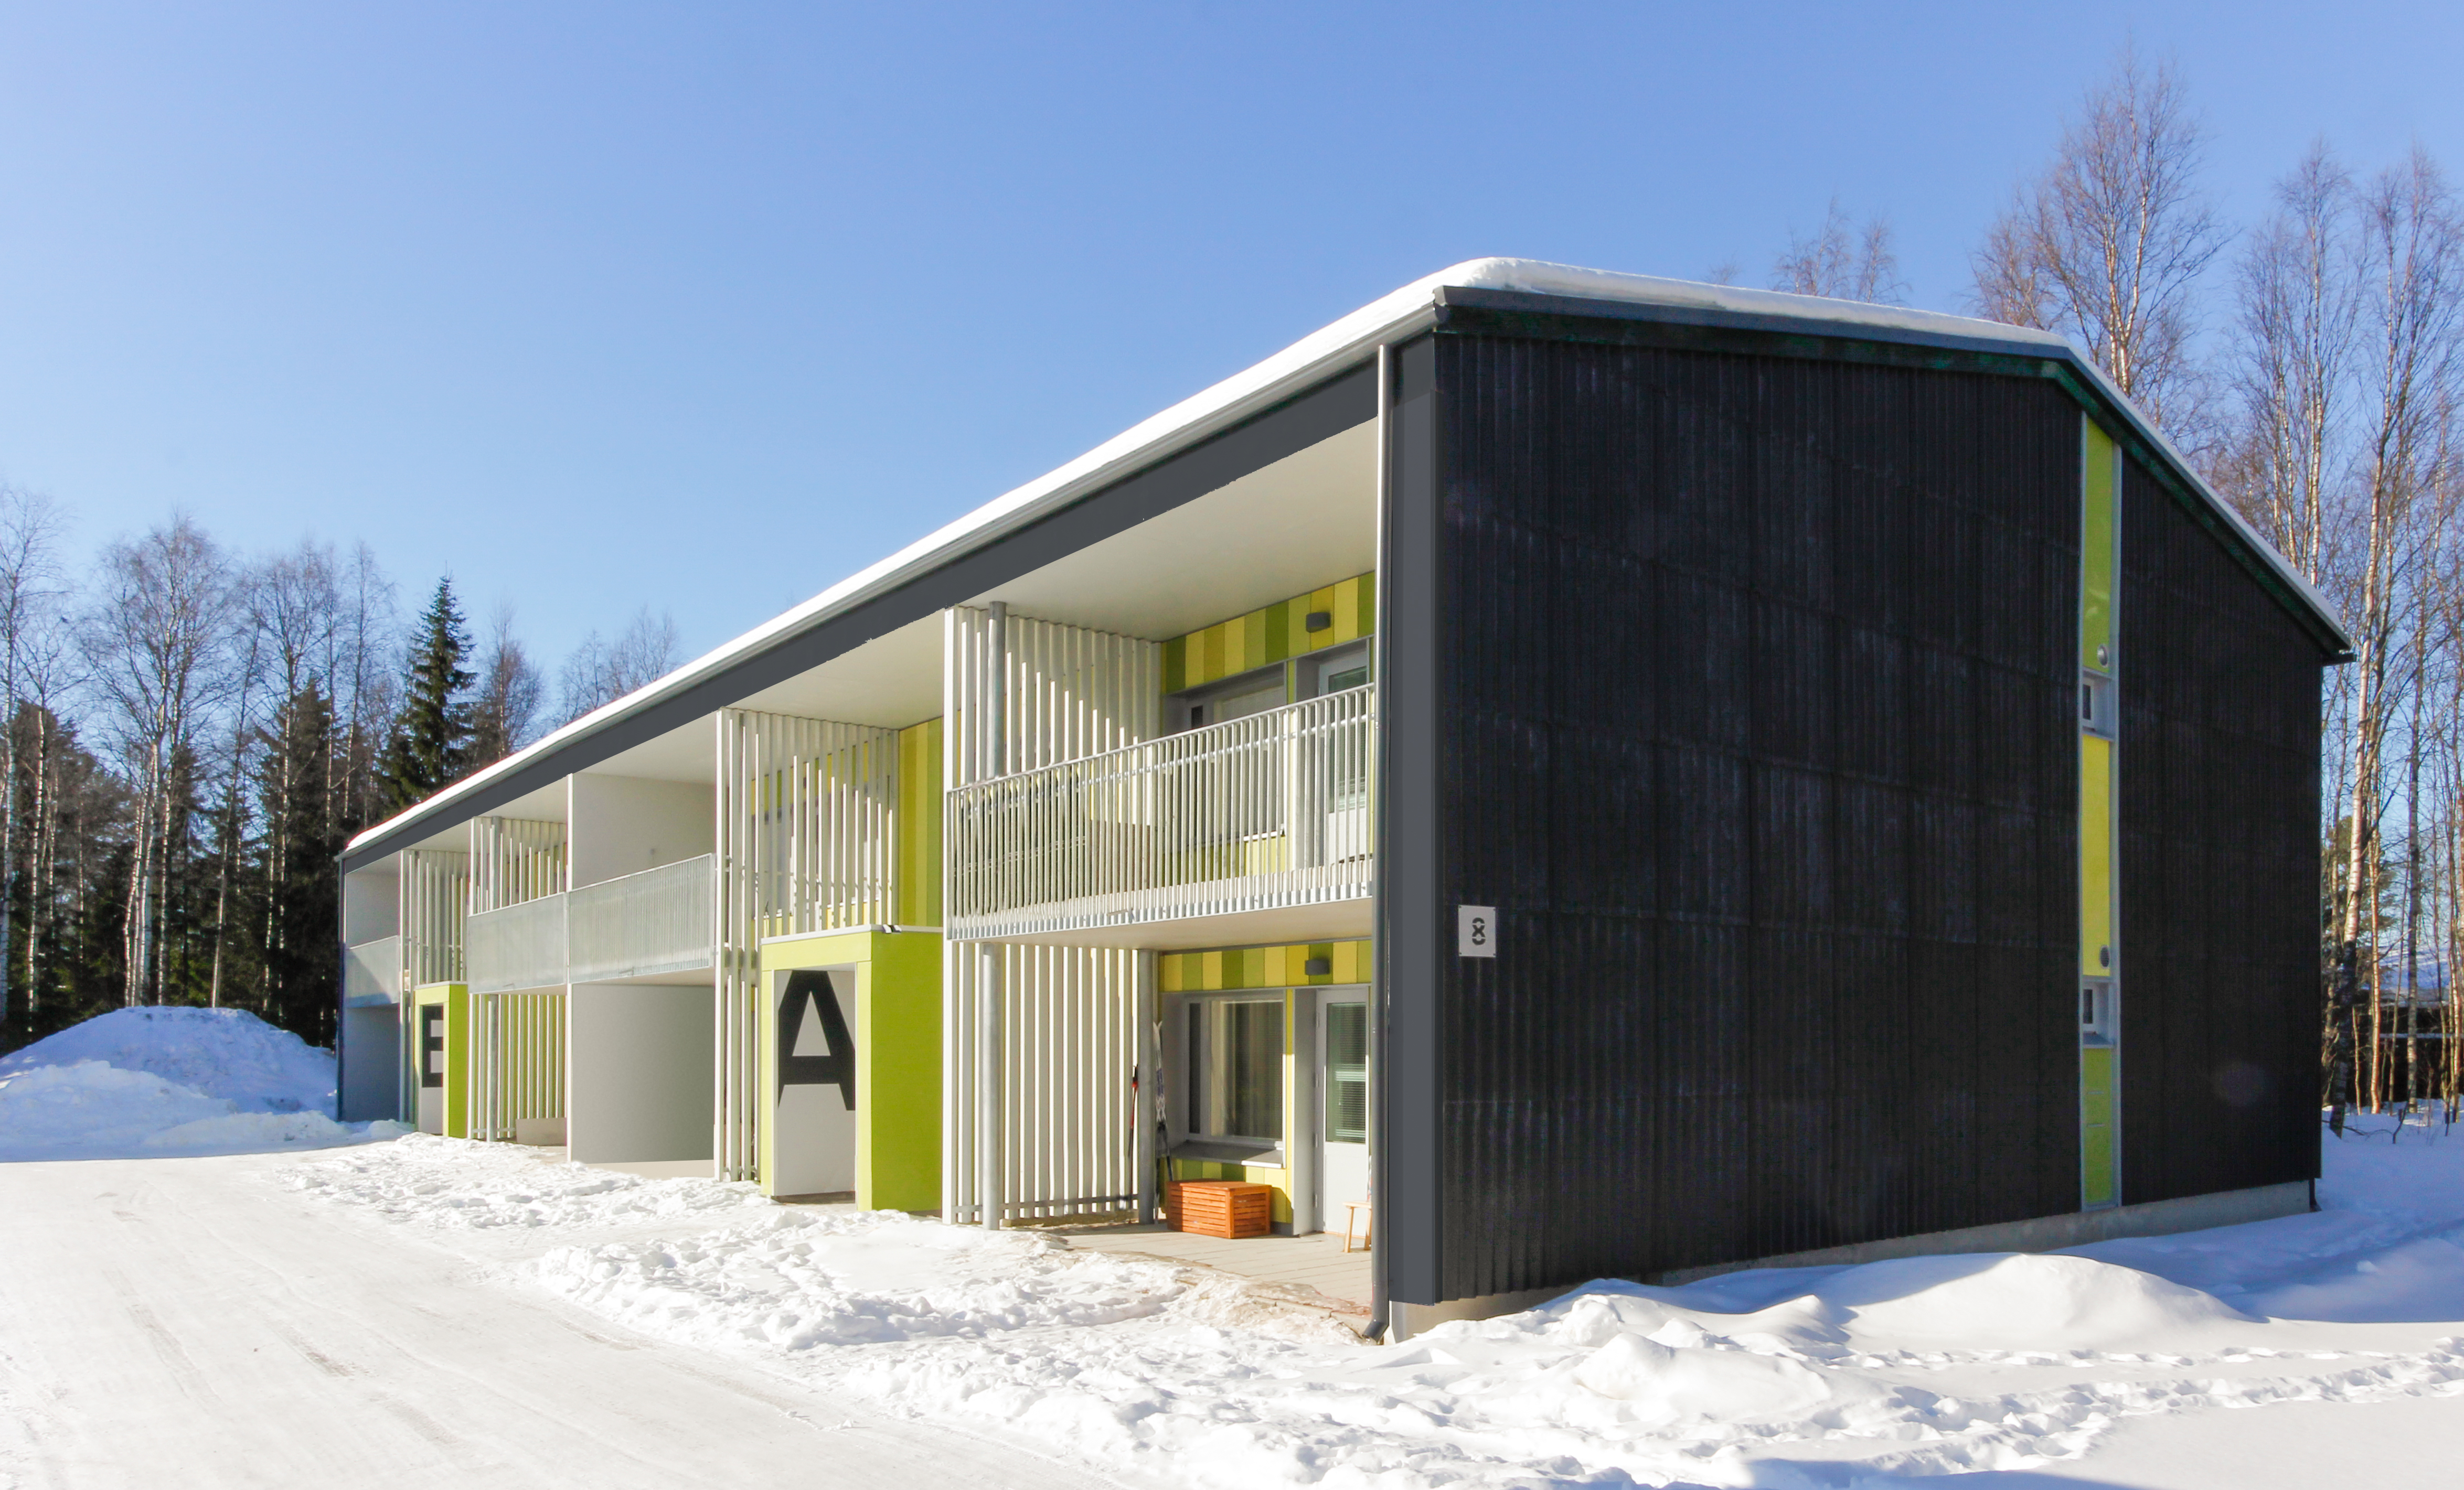 Industrial energy efficient retrofitting of resident buildings in cold climates